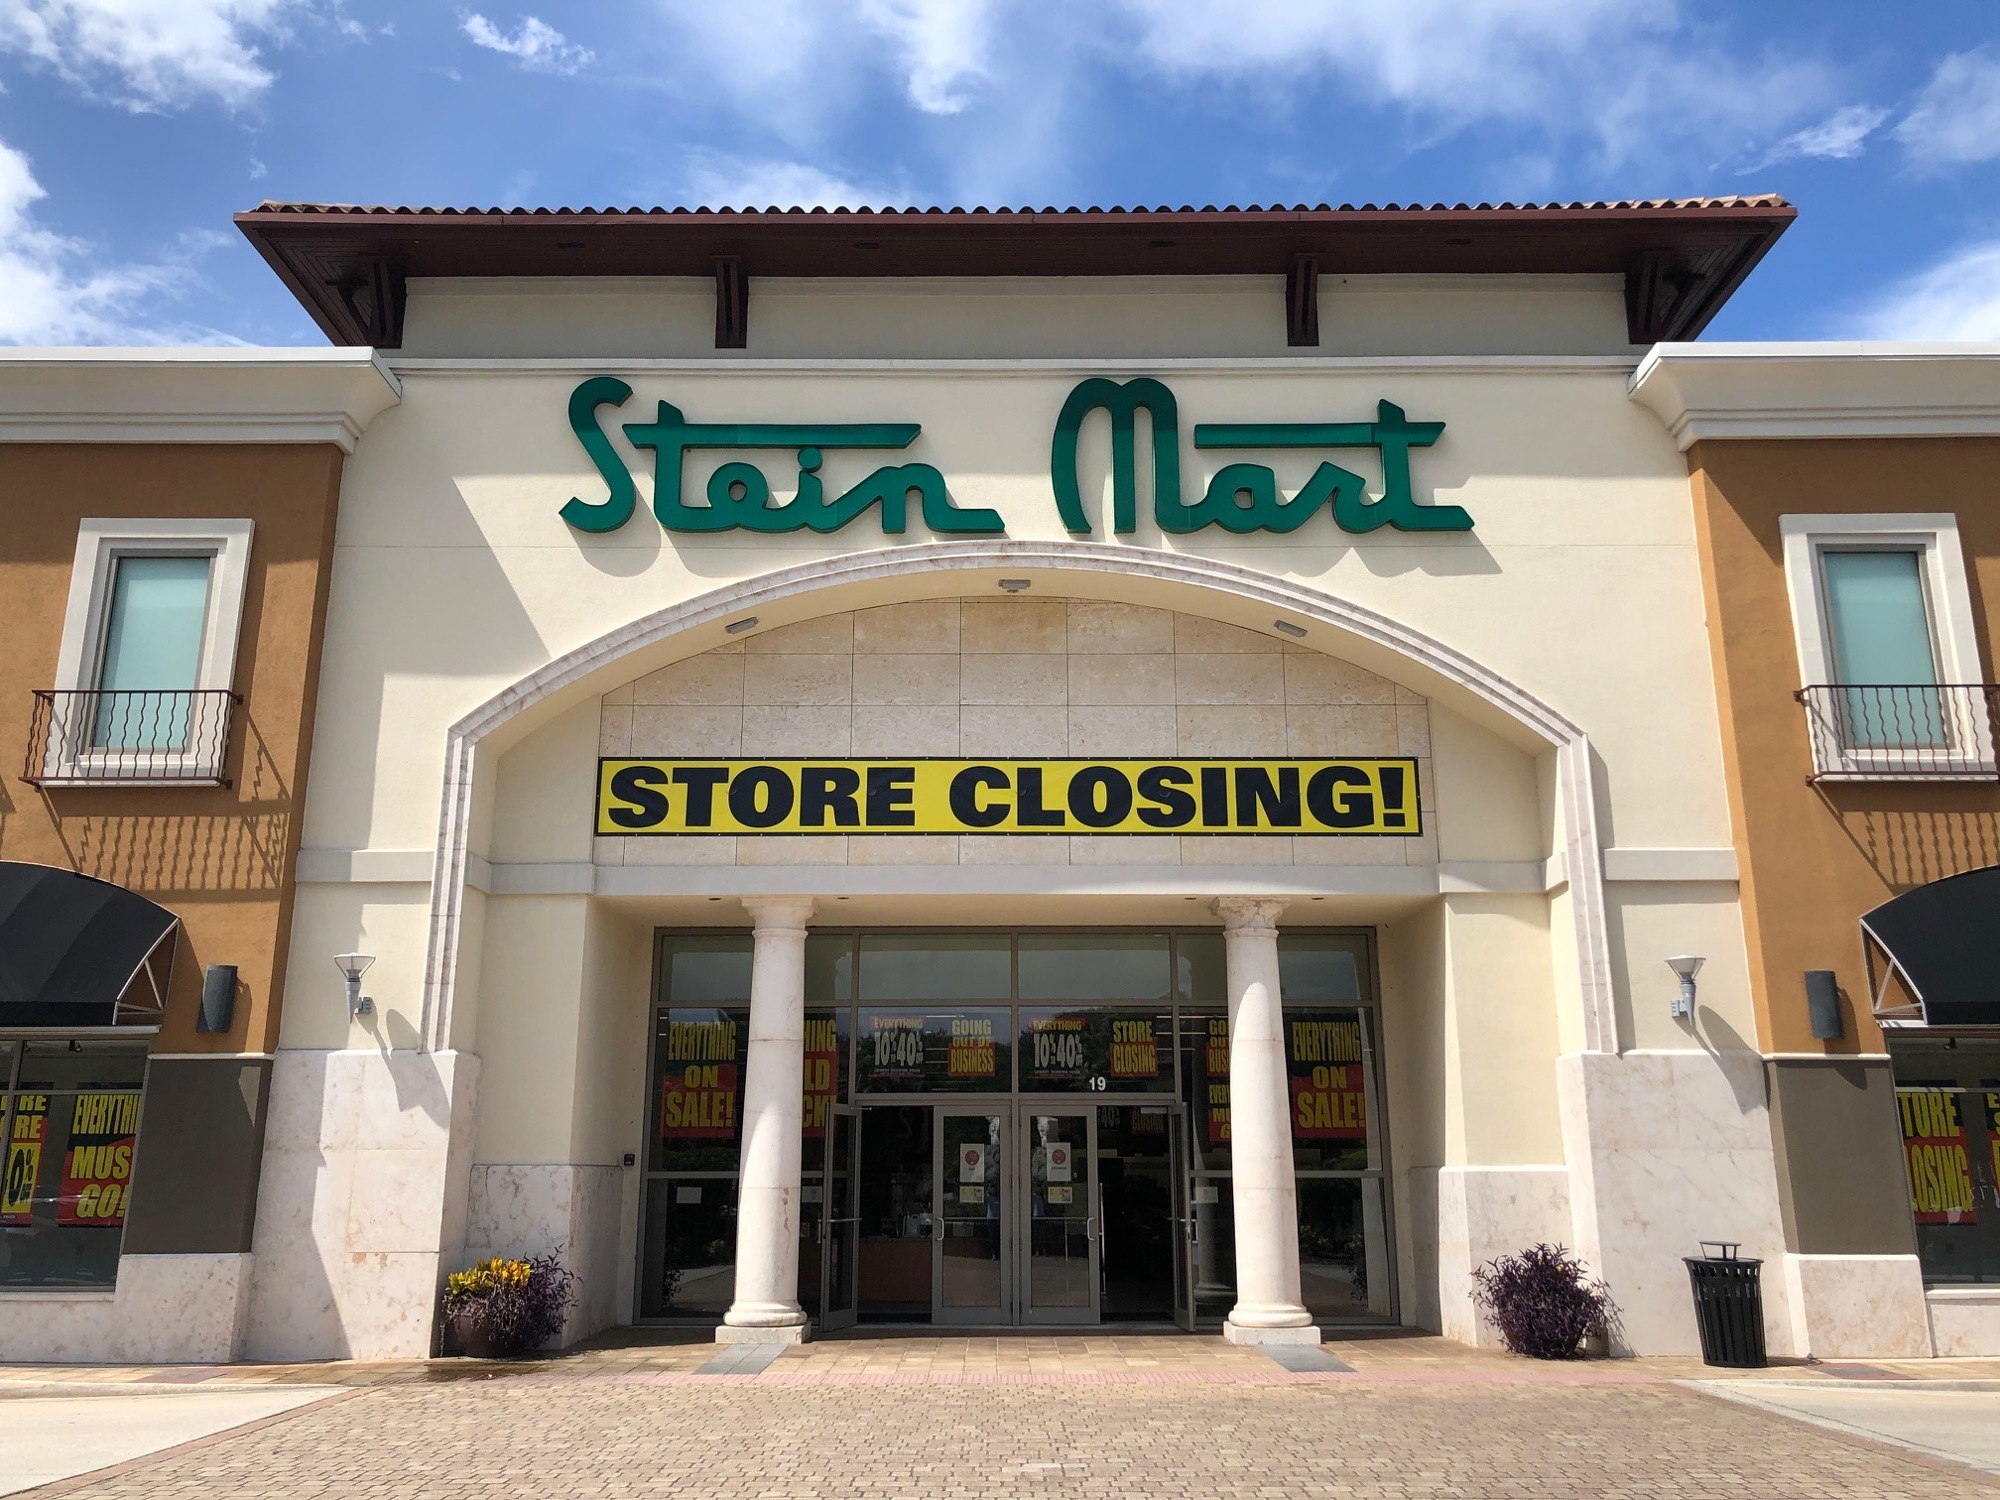 Regency Centers said five of its shopping centers had Stein Mart stores. The bankrupt Jacksonville-based fashion retailer closed all of its stores in October.